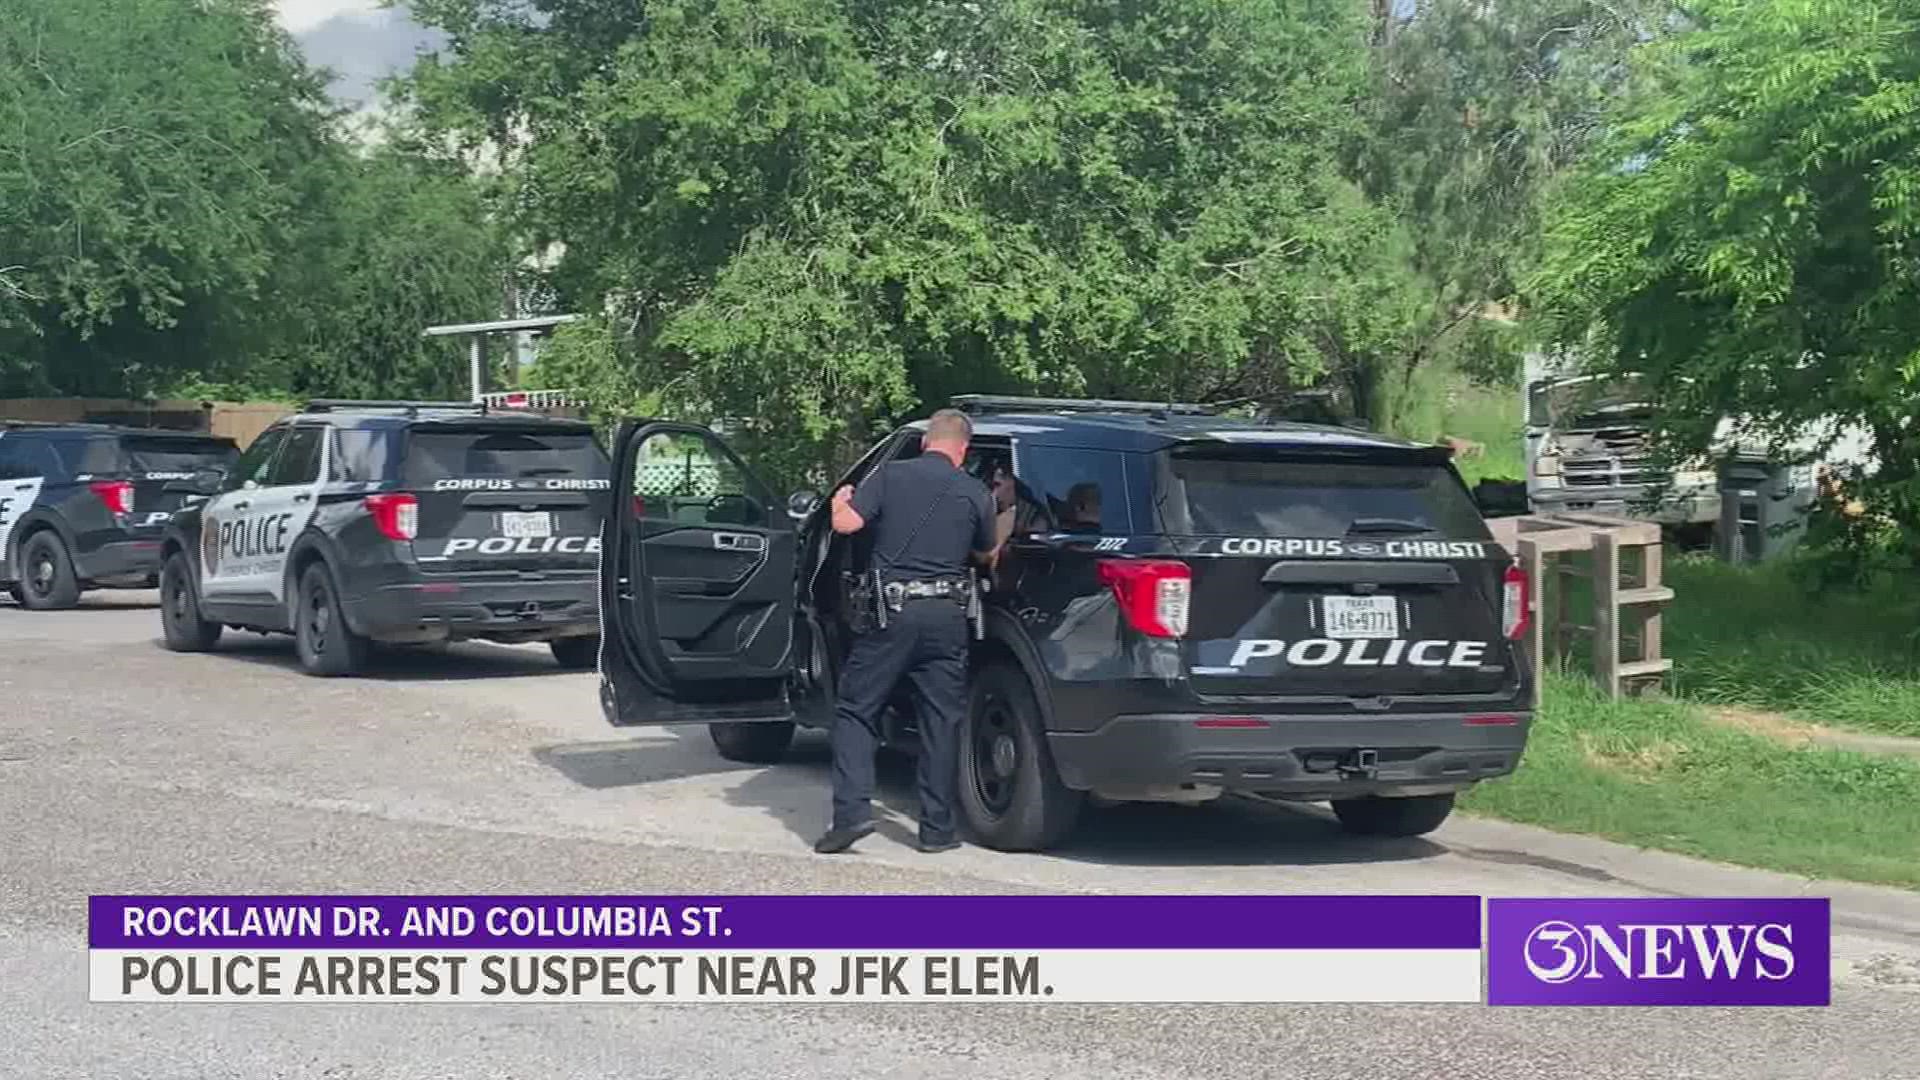 The suspect was eventually caught on Rocklawn Dr. and Columbia St., with just a fence separating him from JFK Elementary, Lt. Edward Longoria with the CCPD said.